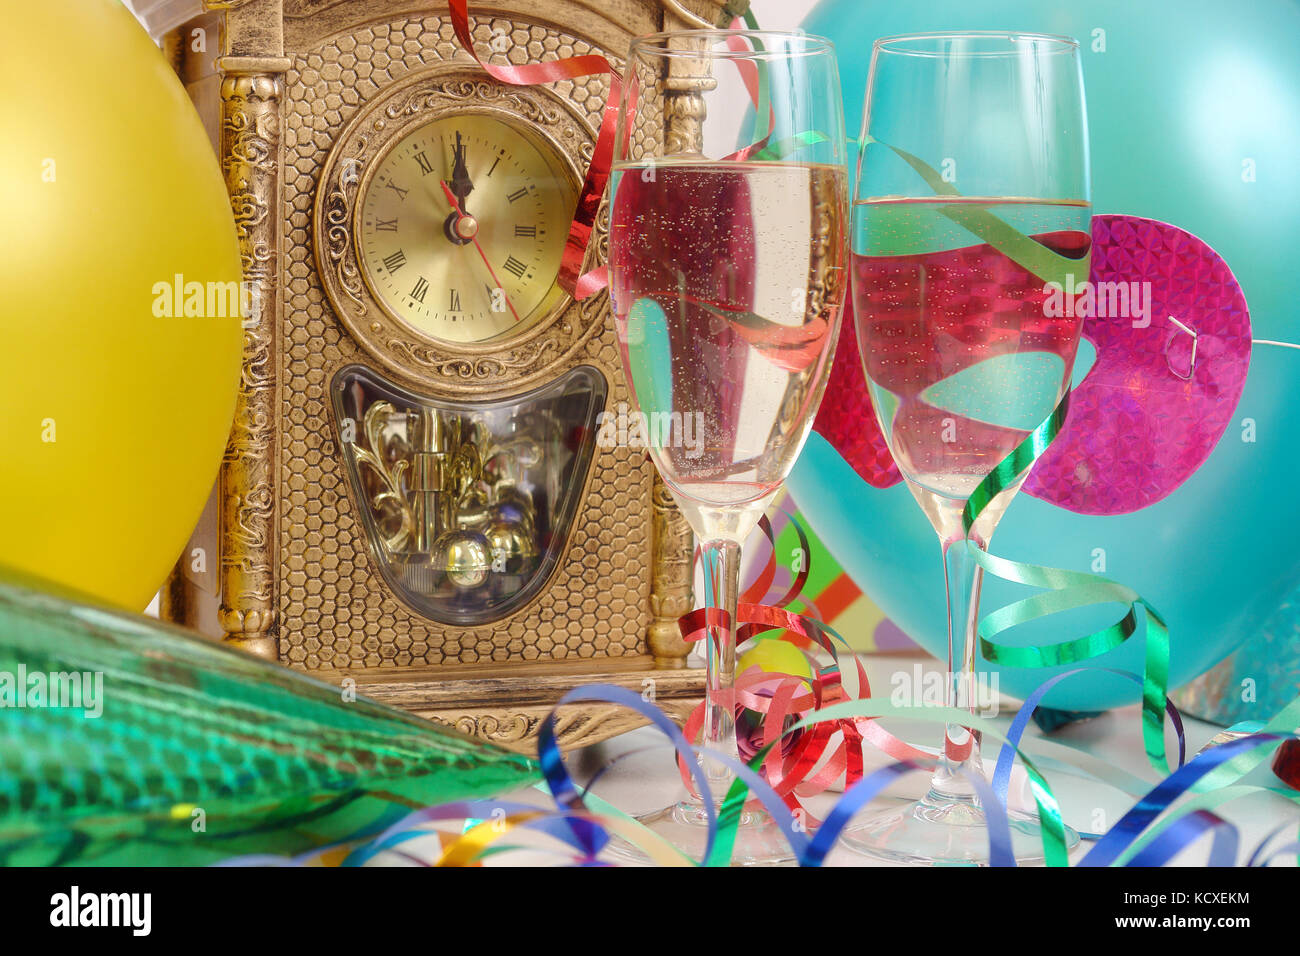 Table clock showing almost midnight, streamers, balloons, and two glasses of champagne Stock Photo